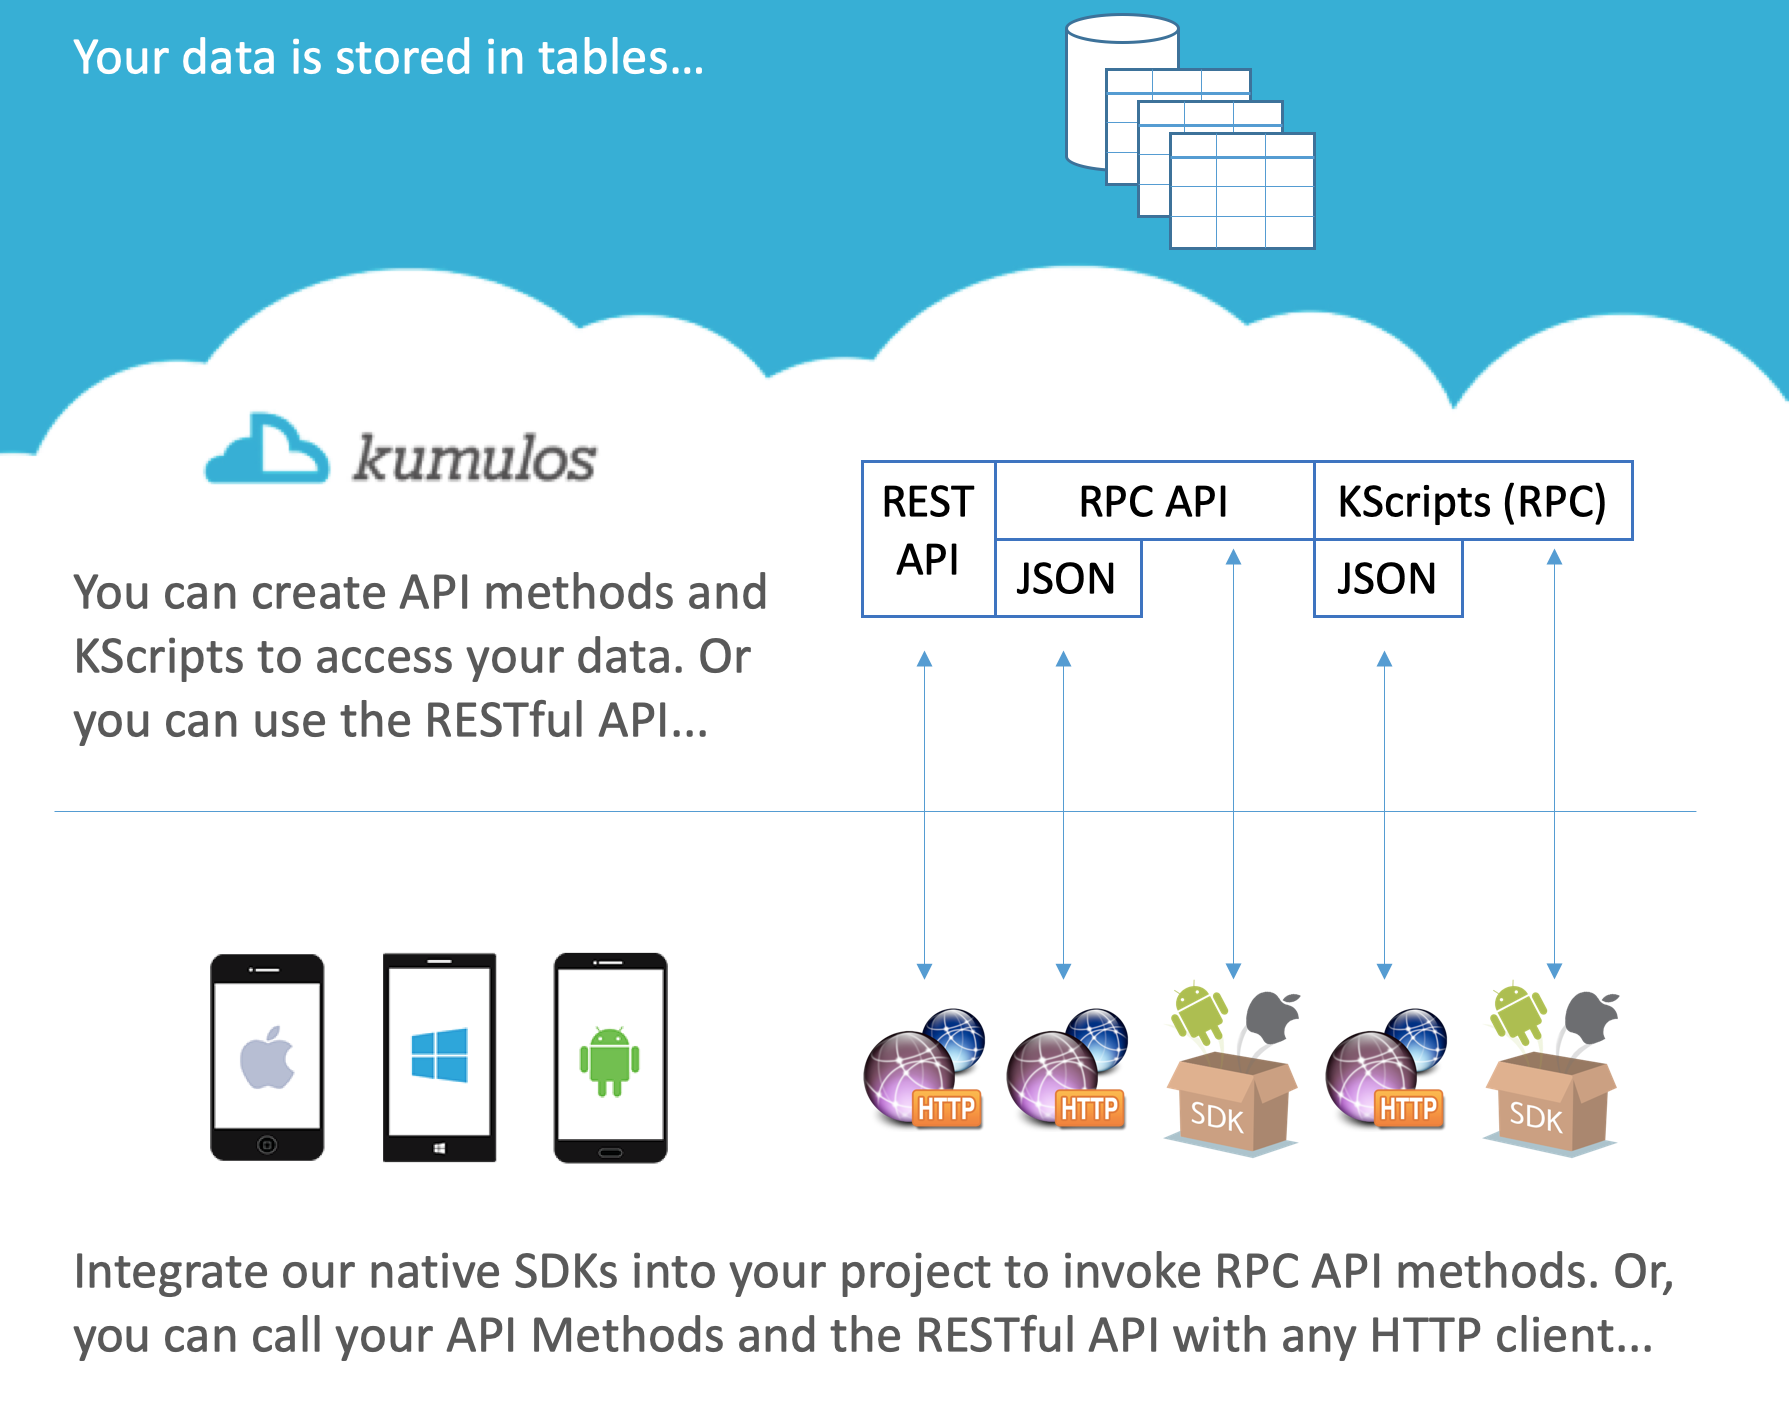 Kumulos offers multiple ways to access your data stored in the cloud